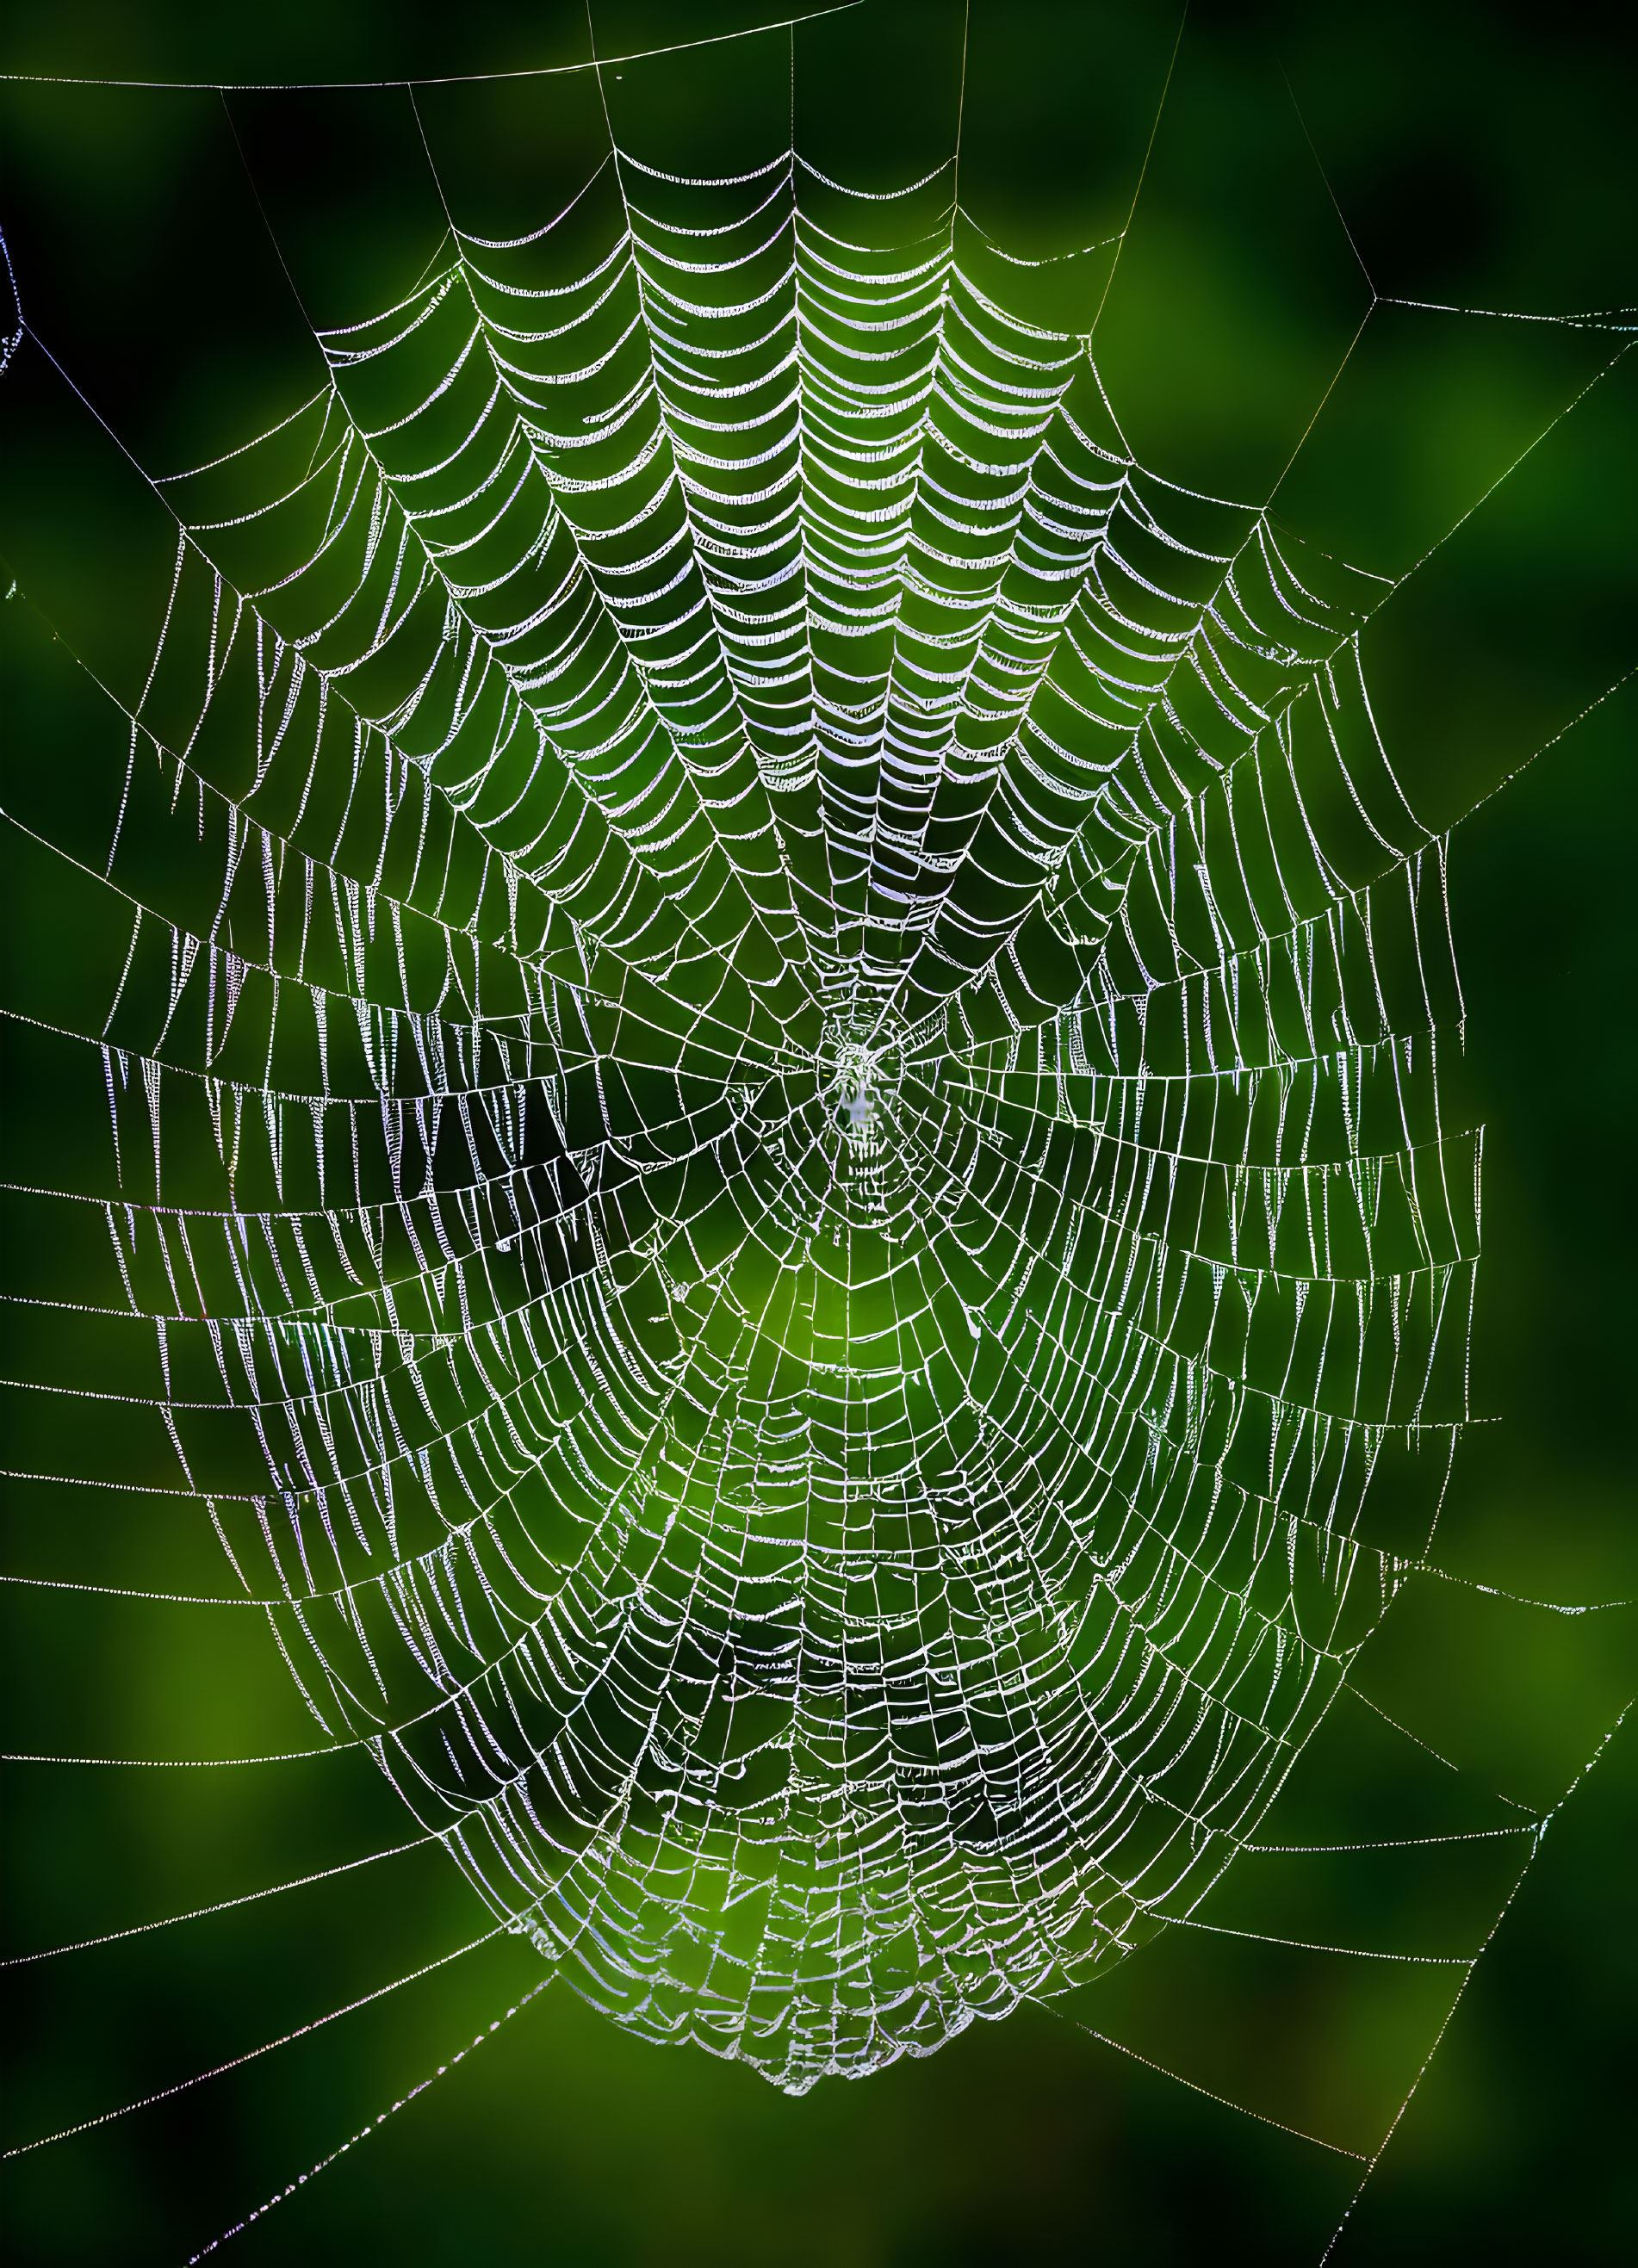 Dew-Covered Spiderweb on Blurred Green Background